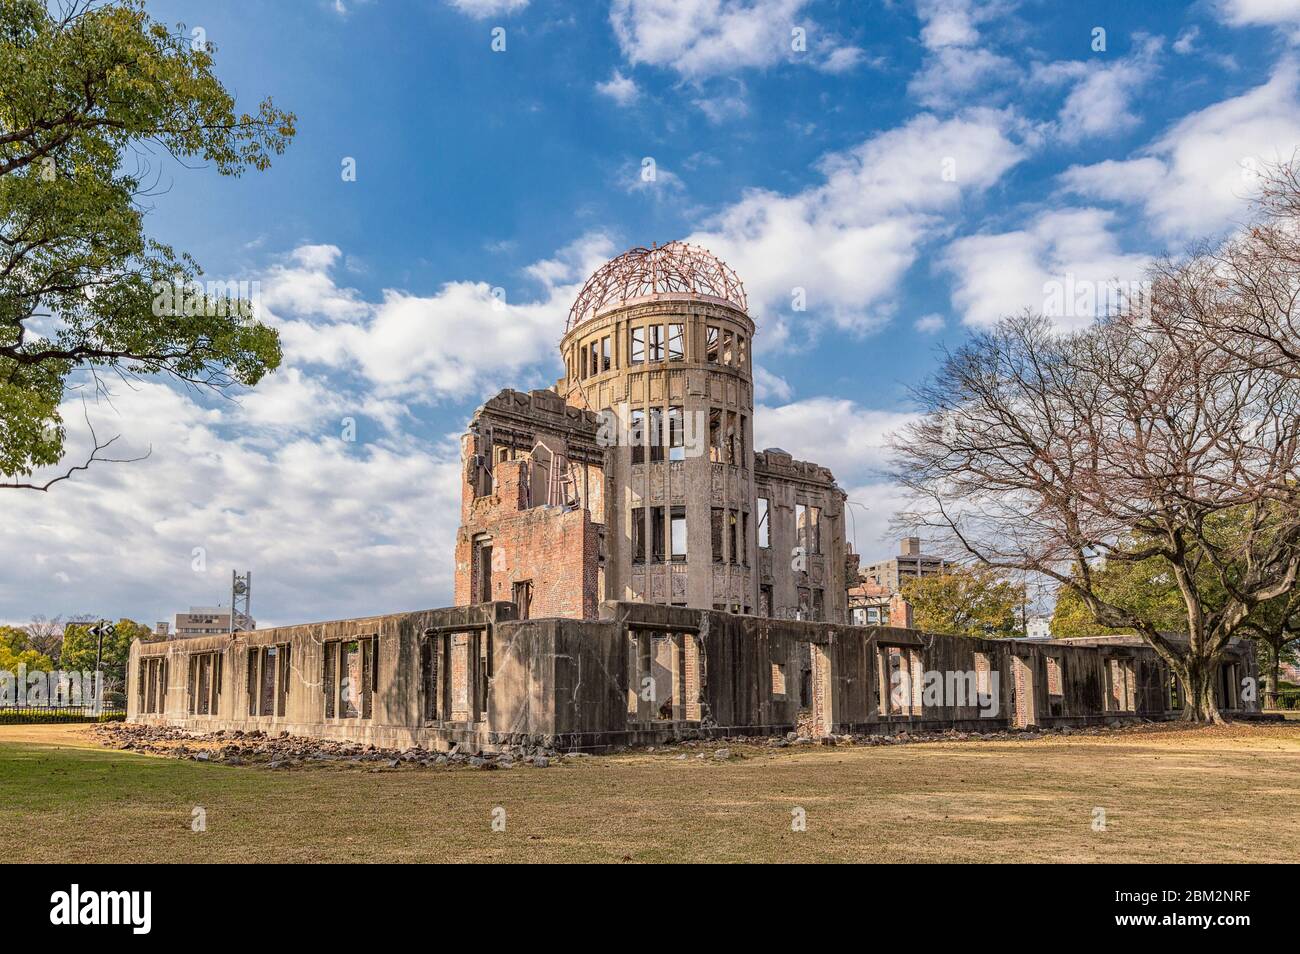 Hiroshima / Japan - December 21, 2017: Atomic Bomb Dome at Hiroshima Peace Memorial, UNESCO World Heritage Site, memorial to victims of nuclear attack Stock Photo